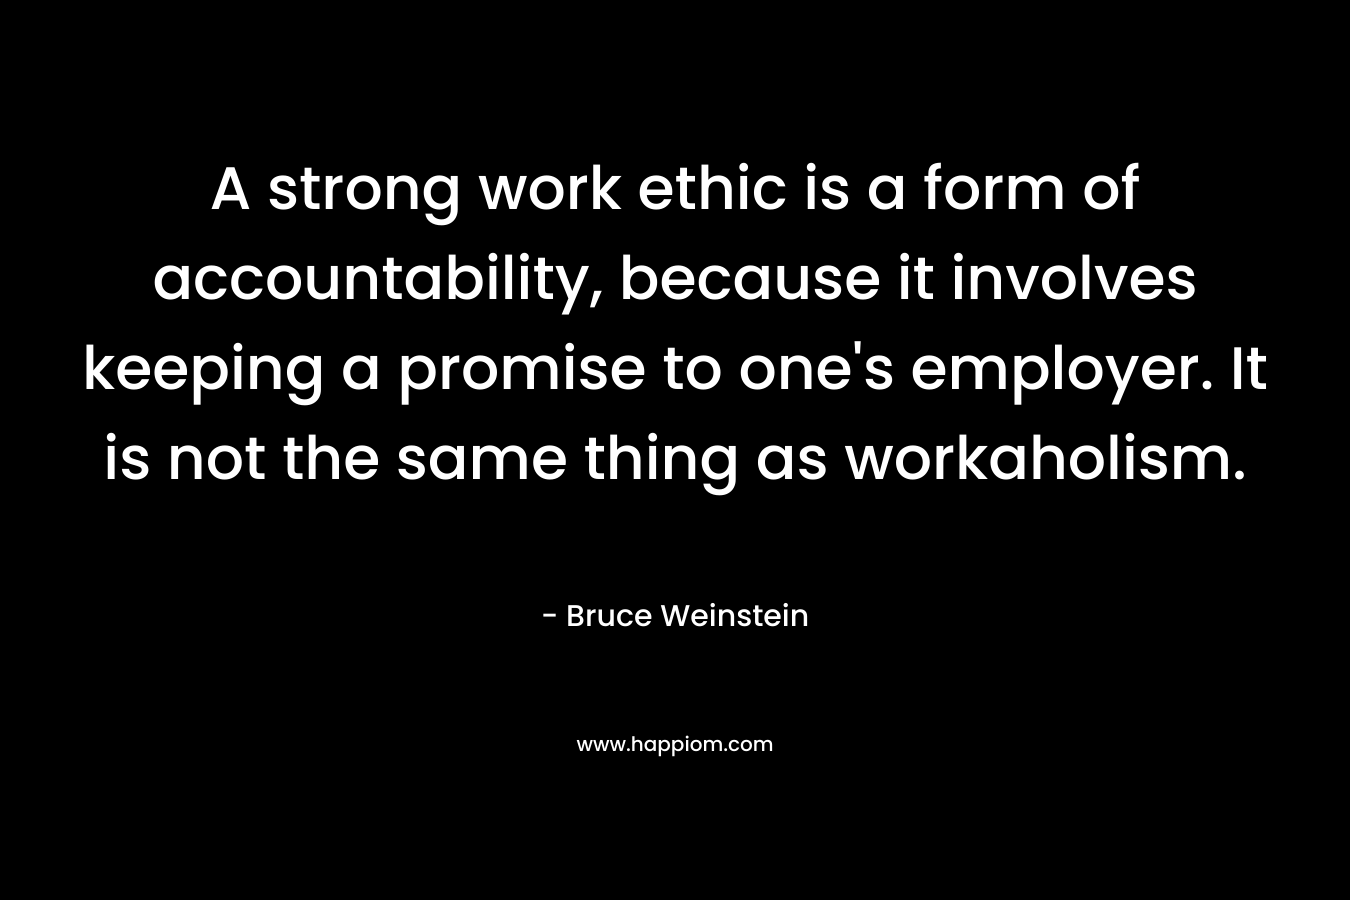 A strong work ethic is a form of accountability, because it involves keeping a promise to one's employer. It is not the same thing as workaholism.